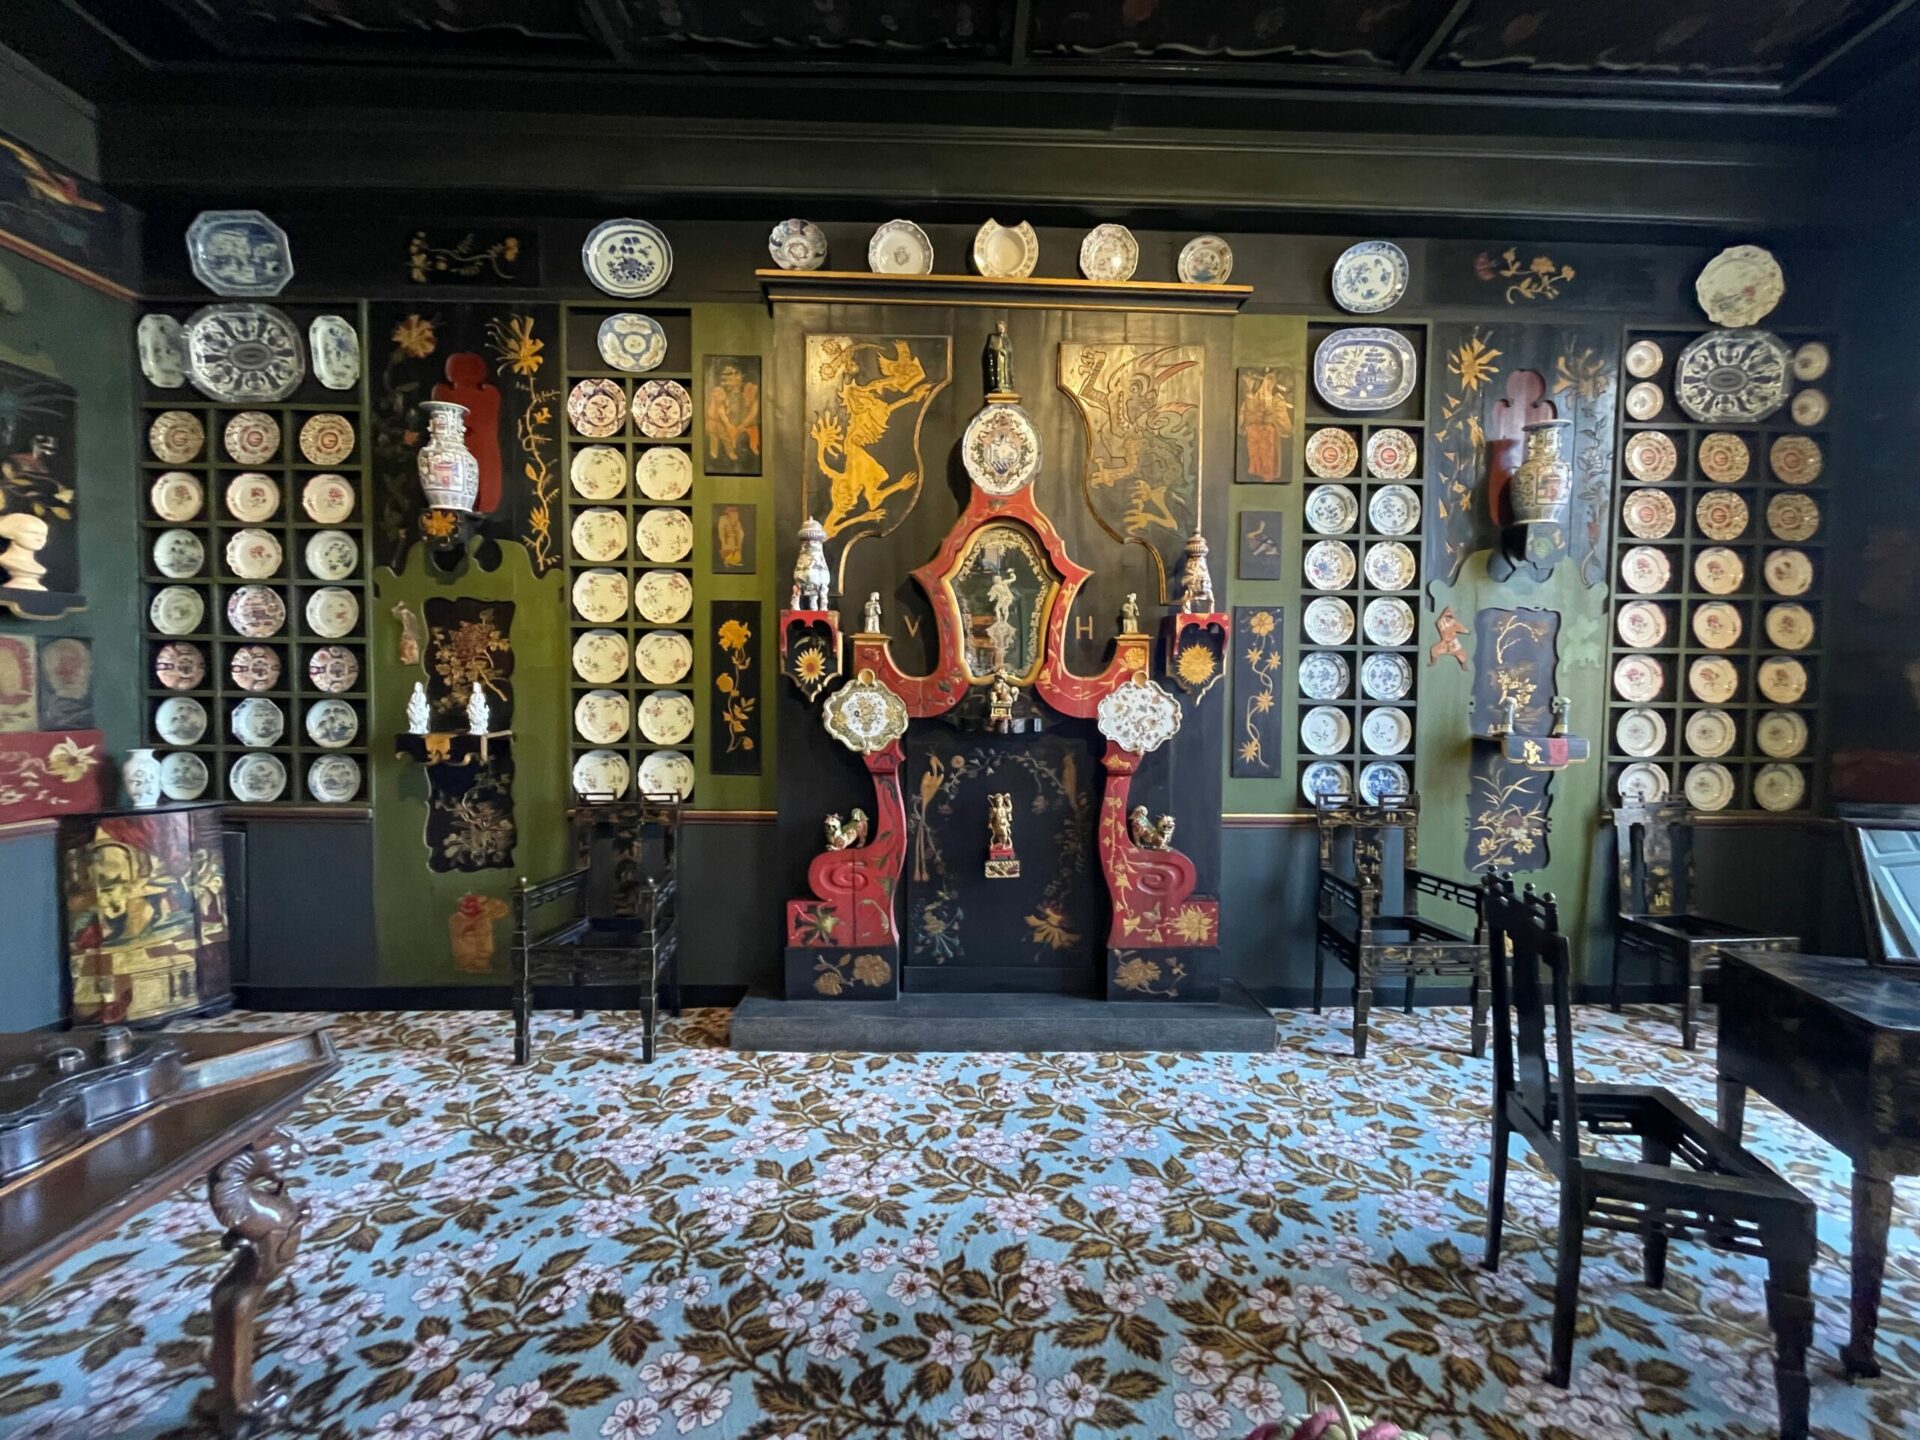 A wall display of Victor Hugo's China and serving plates.